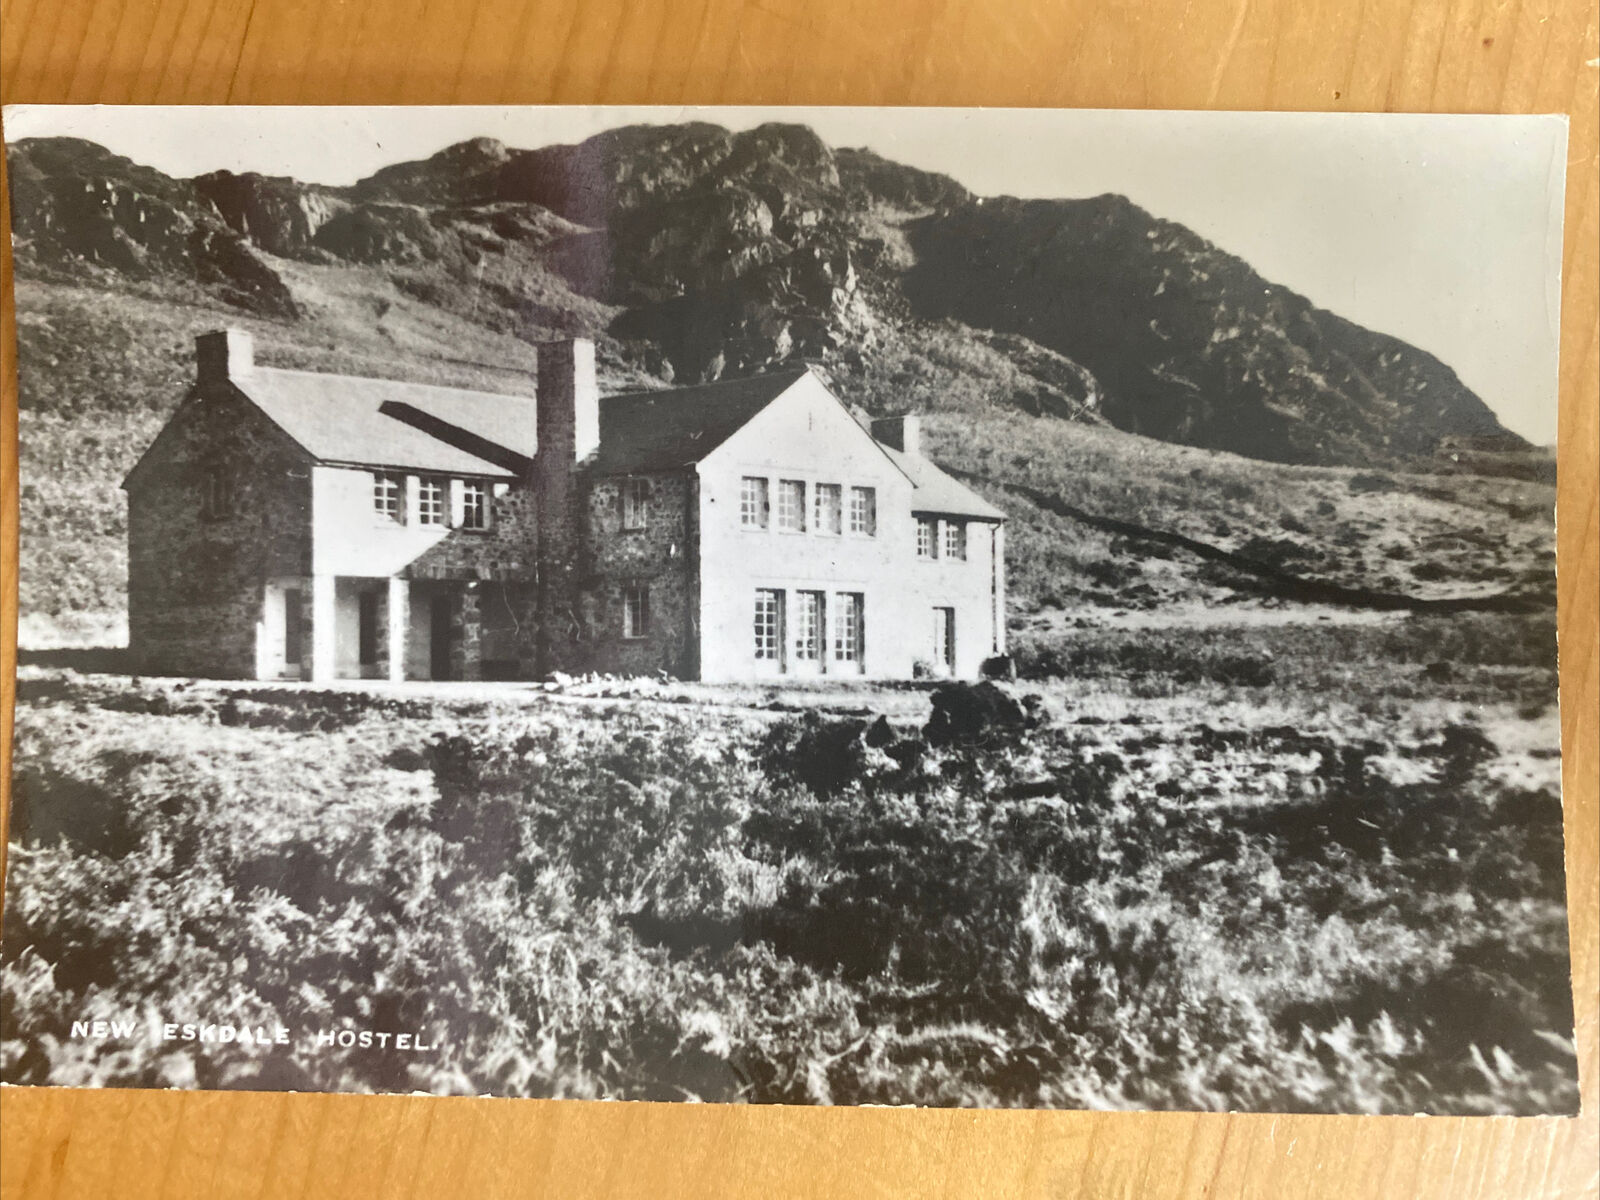 House Clearance - New Eskdale Hostel Cumbria Real Photo Service 1950s